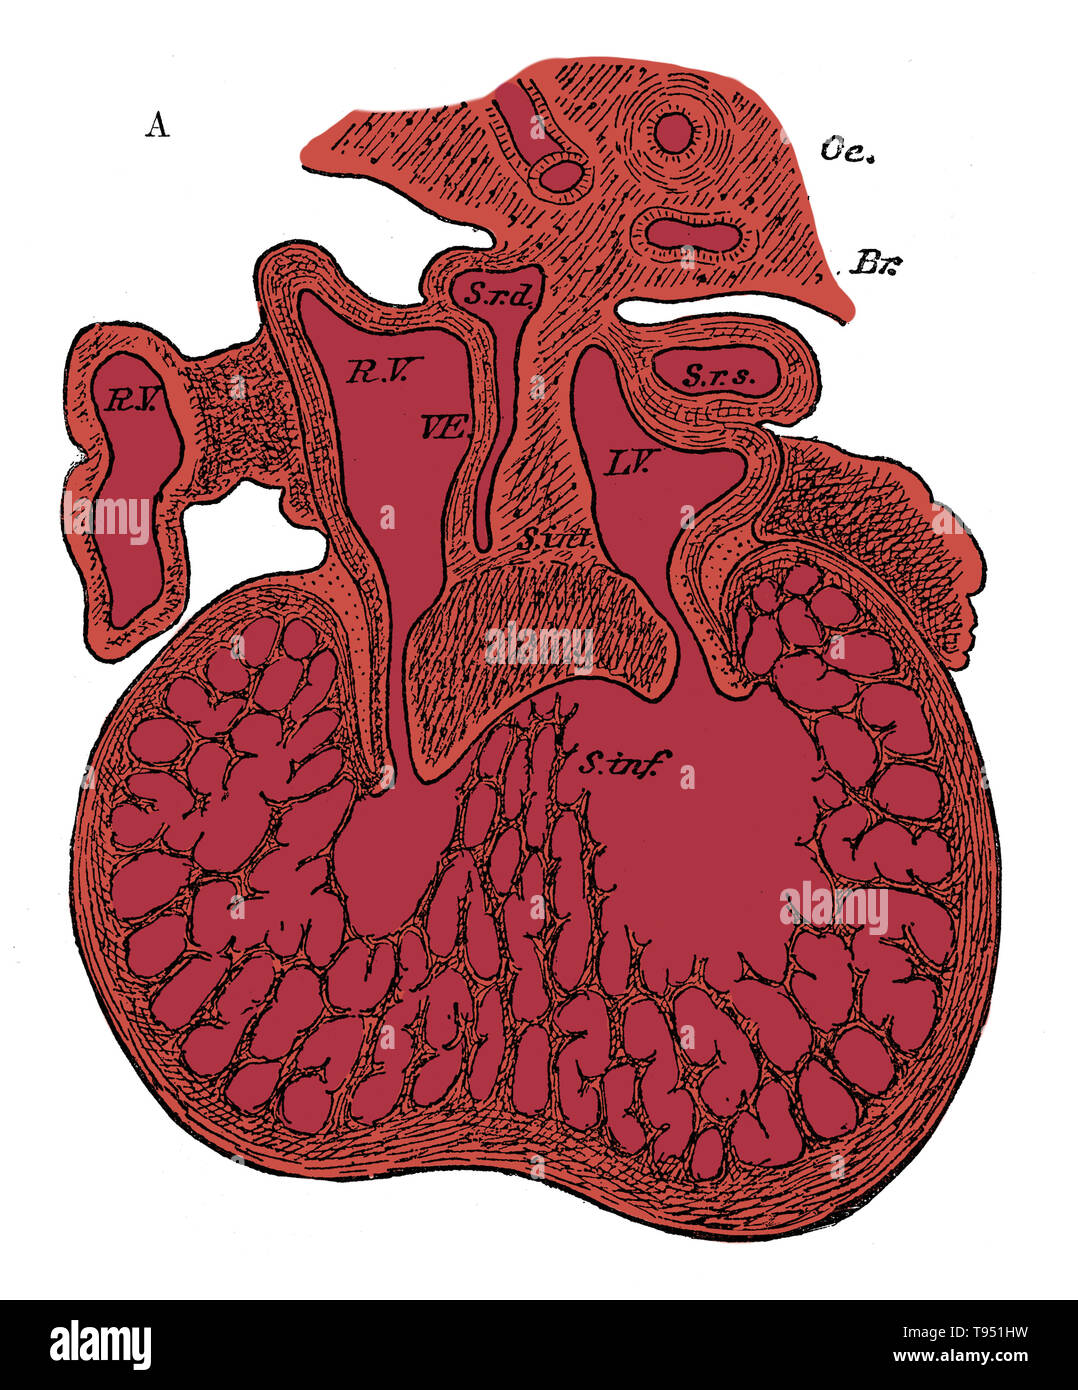 Section through the heart of human embryo showing the formation of the cardiac septa and the auriculo-ventricular valves, 5 to 6 weeks. R.V, right auricle; L.V, left auricle; S.r.d, right horn of sinus; Sr.s, left horn of sinus; s. int, septum superior and endocardial cushion (septum intermedium); s. inf, septum infers ventriculorum; This septum, as well as the bulk of the ventricle, is a muscular sponge at this stage. Oc, esophagus; Br, bronchus. Stock Photo